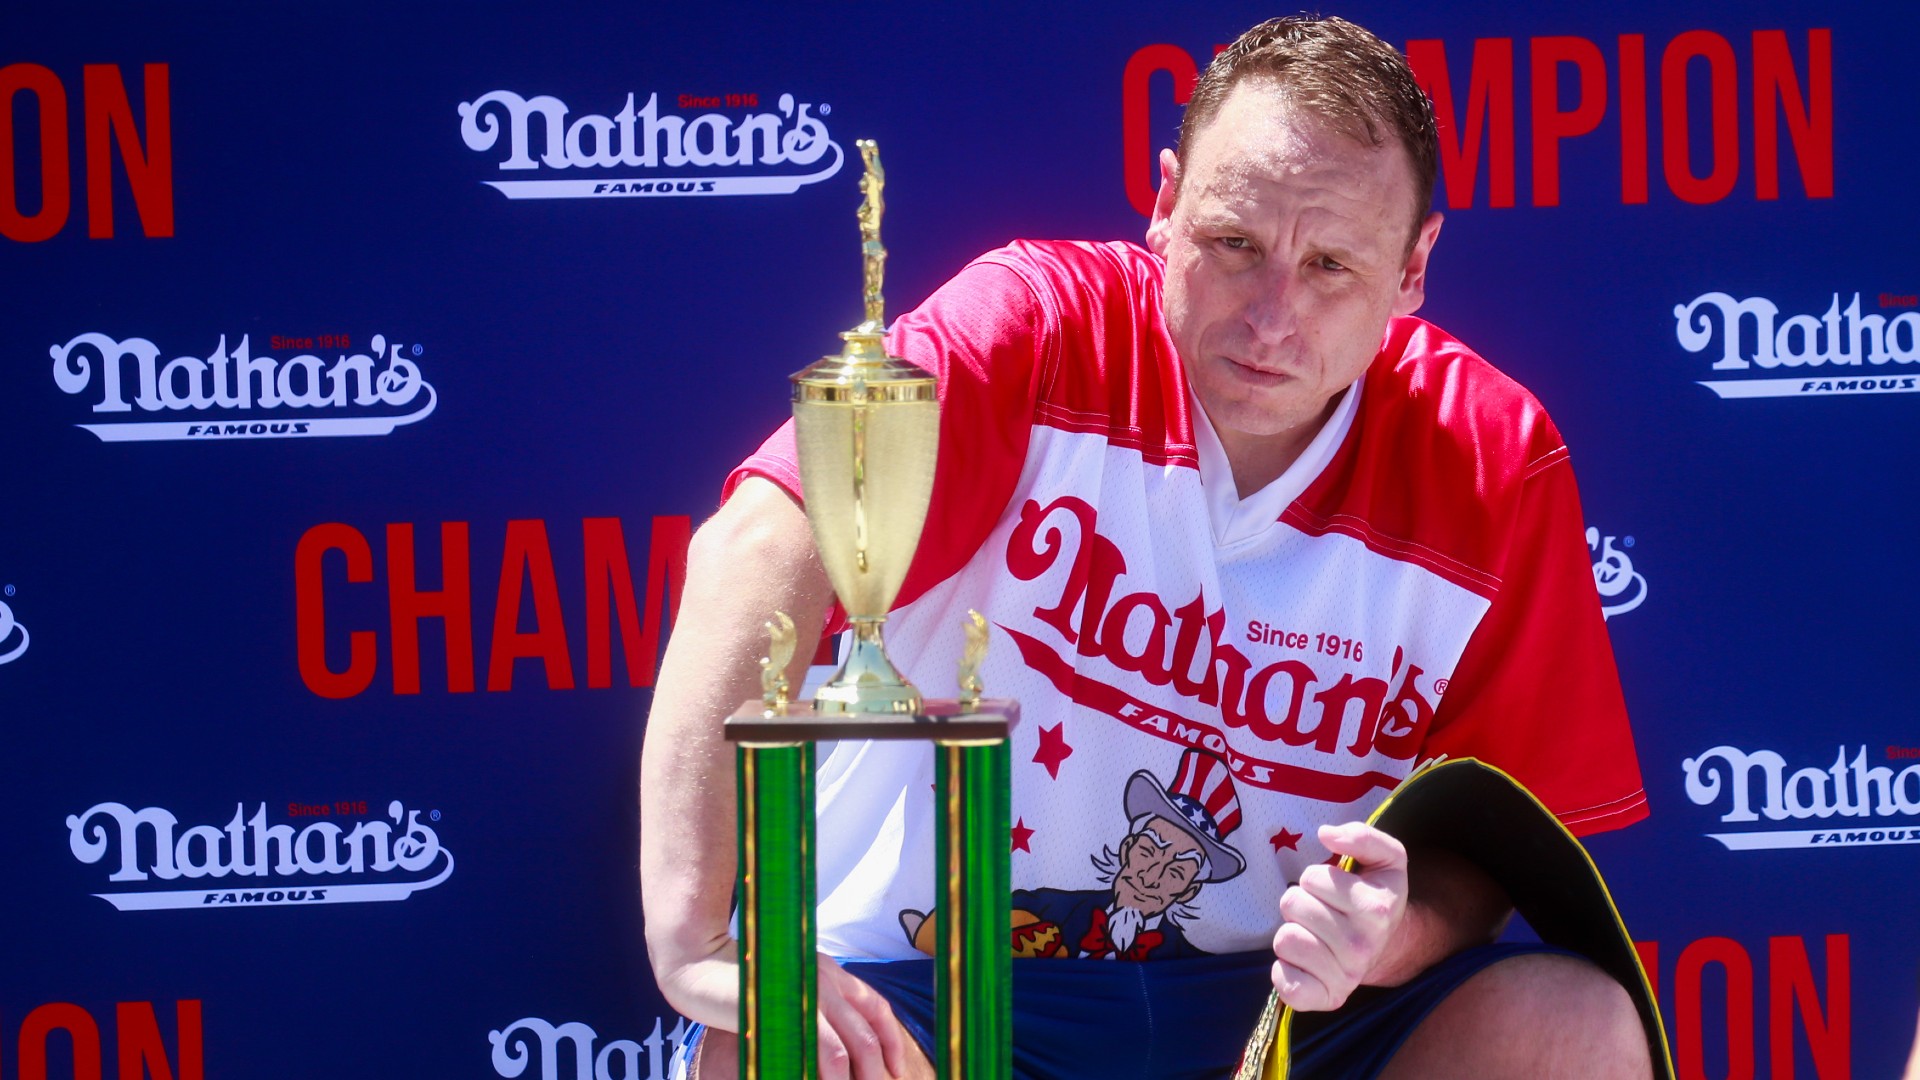 Joey Chestnut, famed hot dog eater, partners with vegan brand and is ousted from July 4th contest